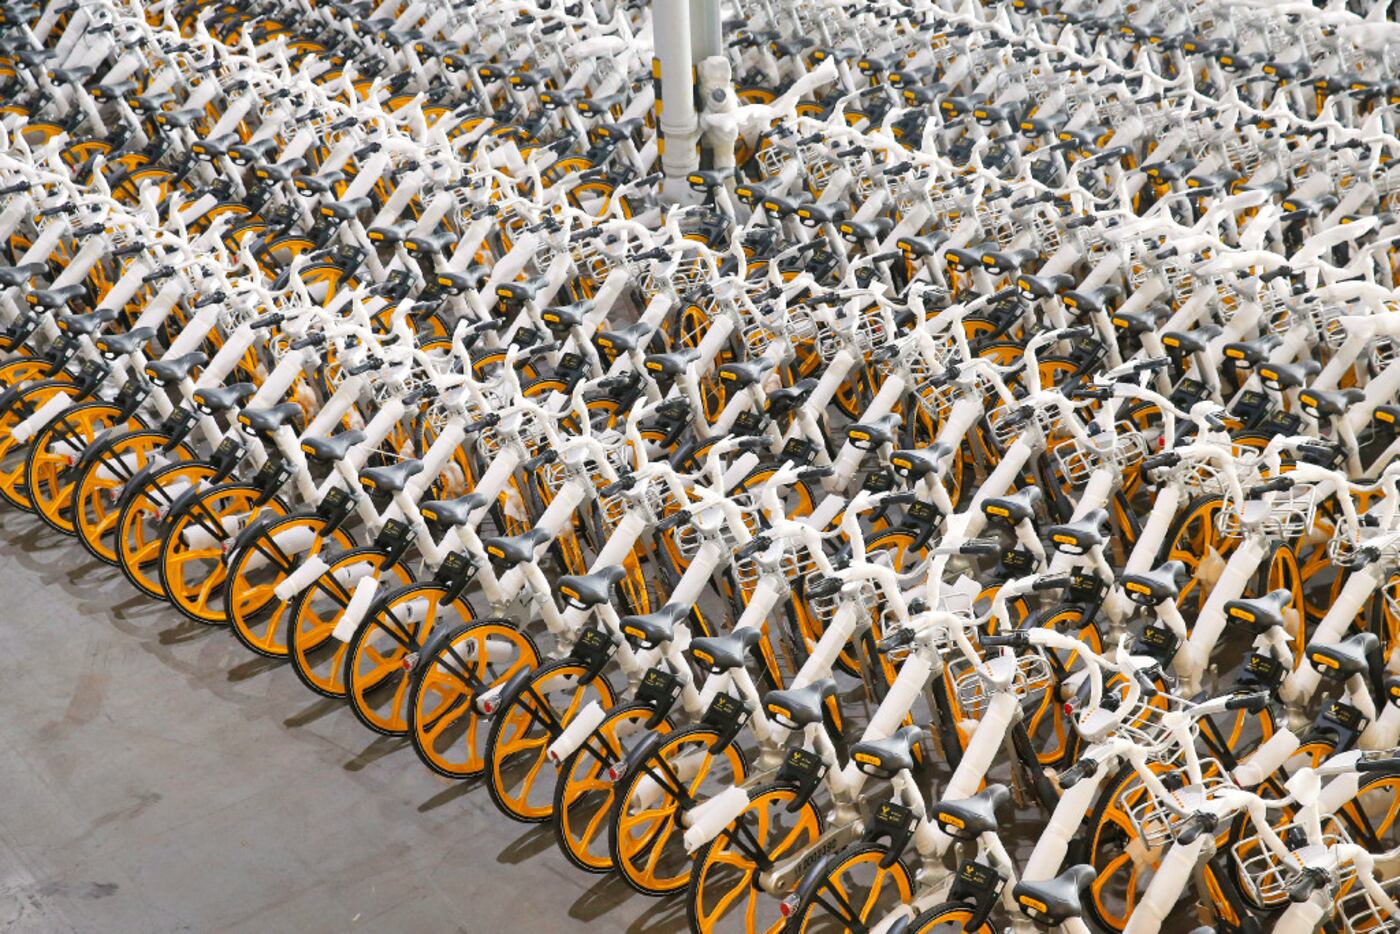 Rows of assembled VBikes, a rent-a-bicycle via downloadable app, are lined up in a Garland...